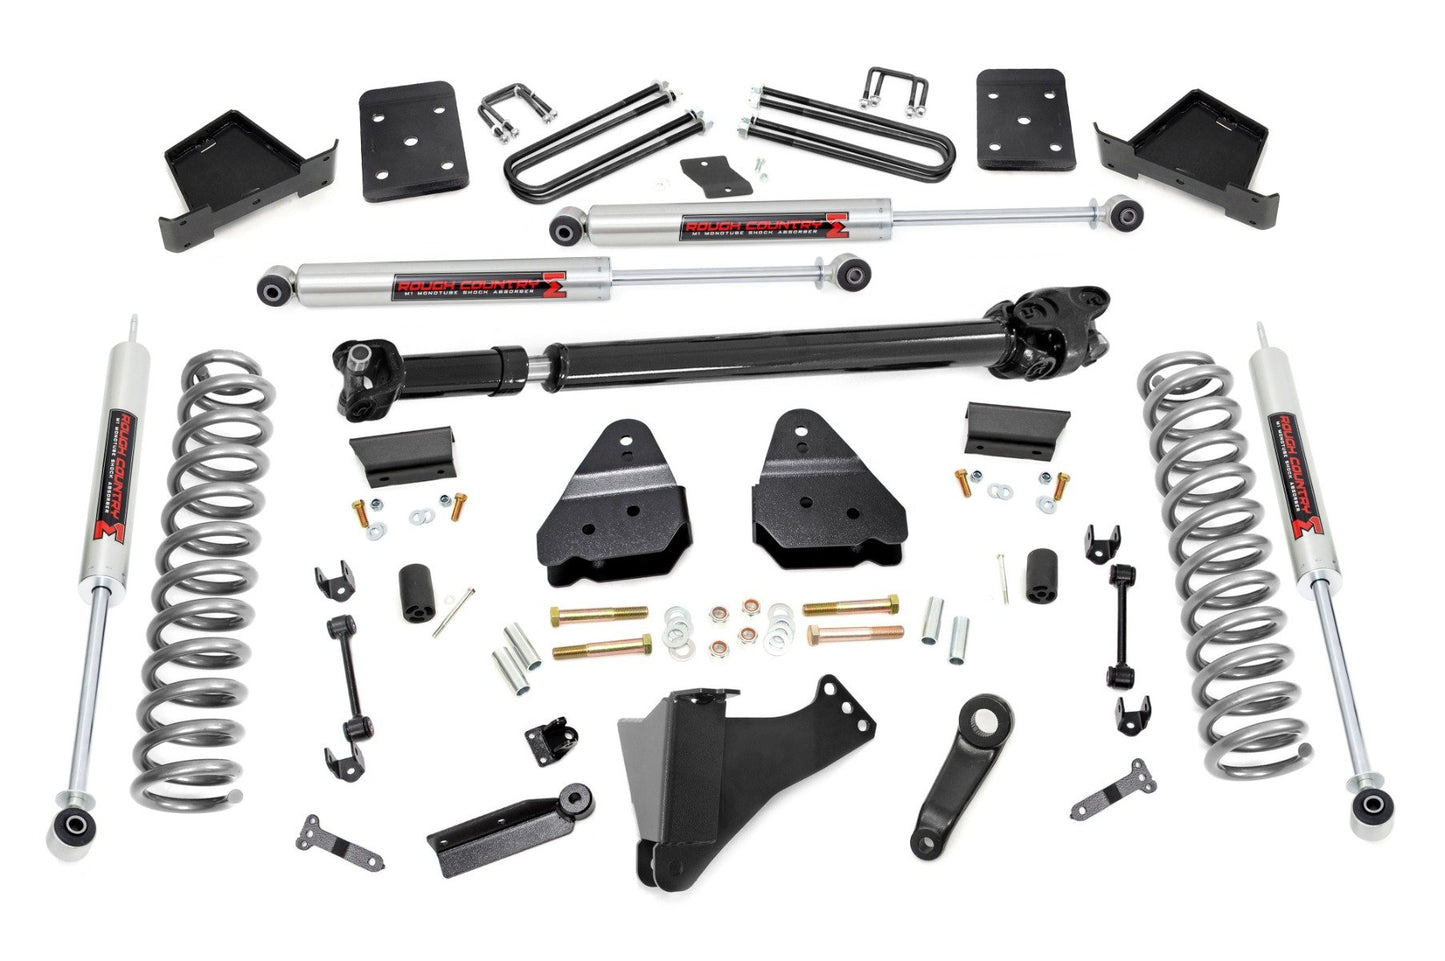 Rough Country 6 Inch Lift Kit | OVLDS | D/S | M1 | Ford F-250/F-350 Super Duty 4WD (17-22)